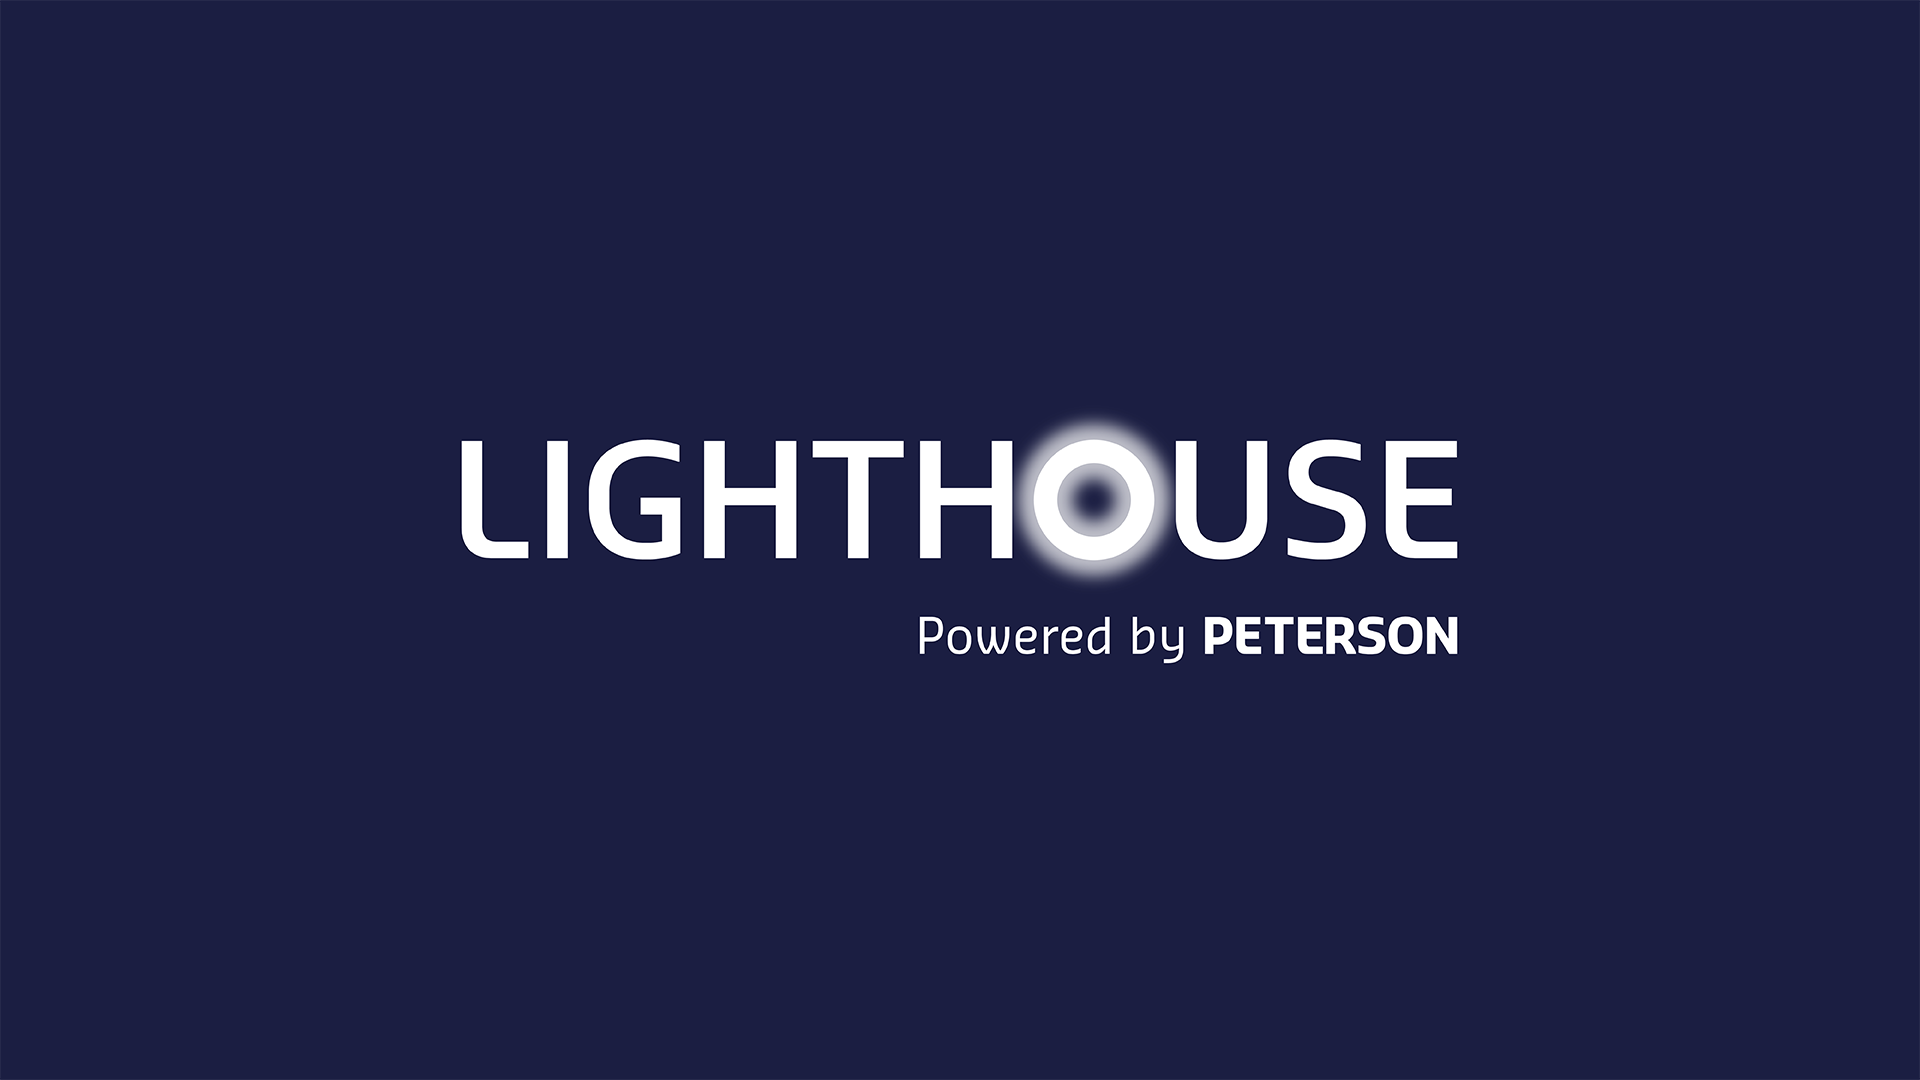 Lighthouse: Powered by Peterson